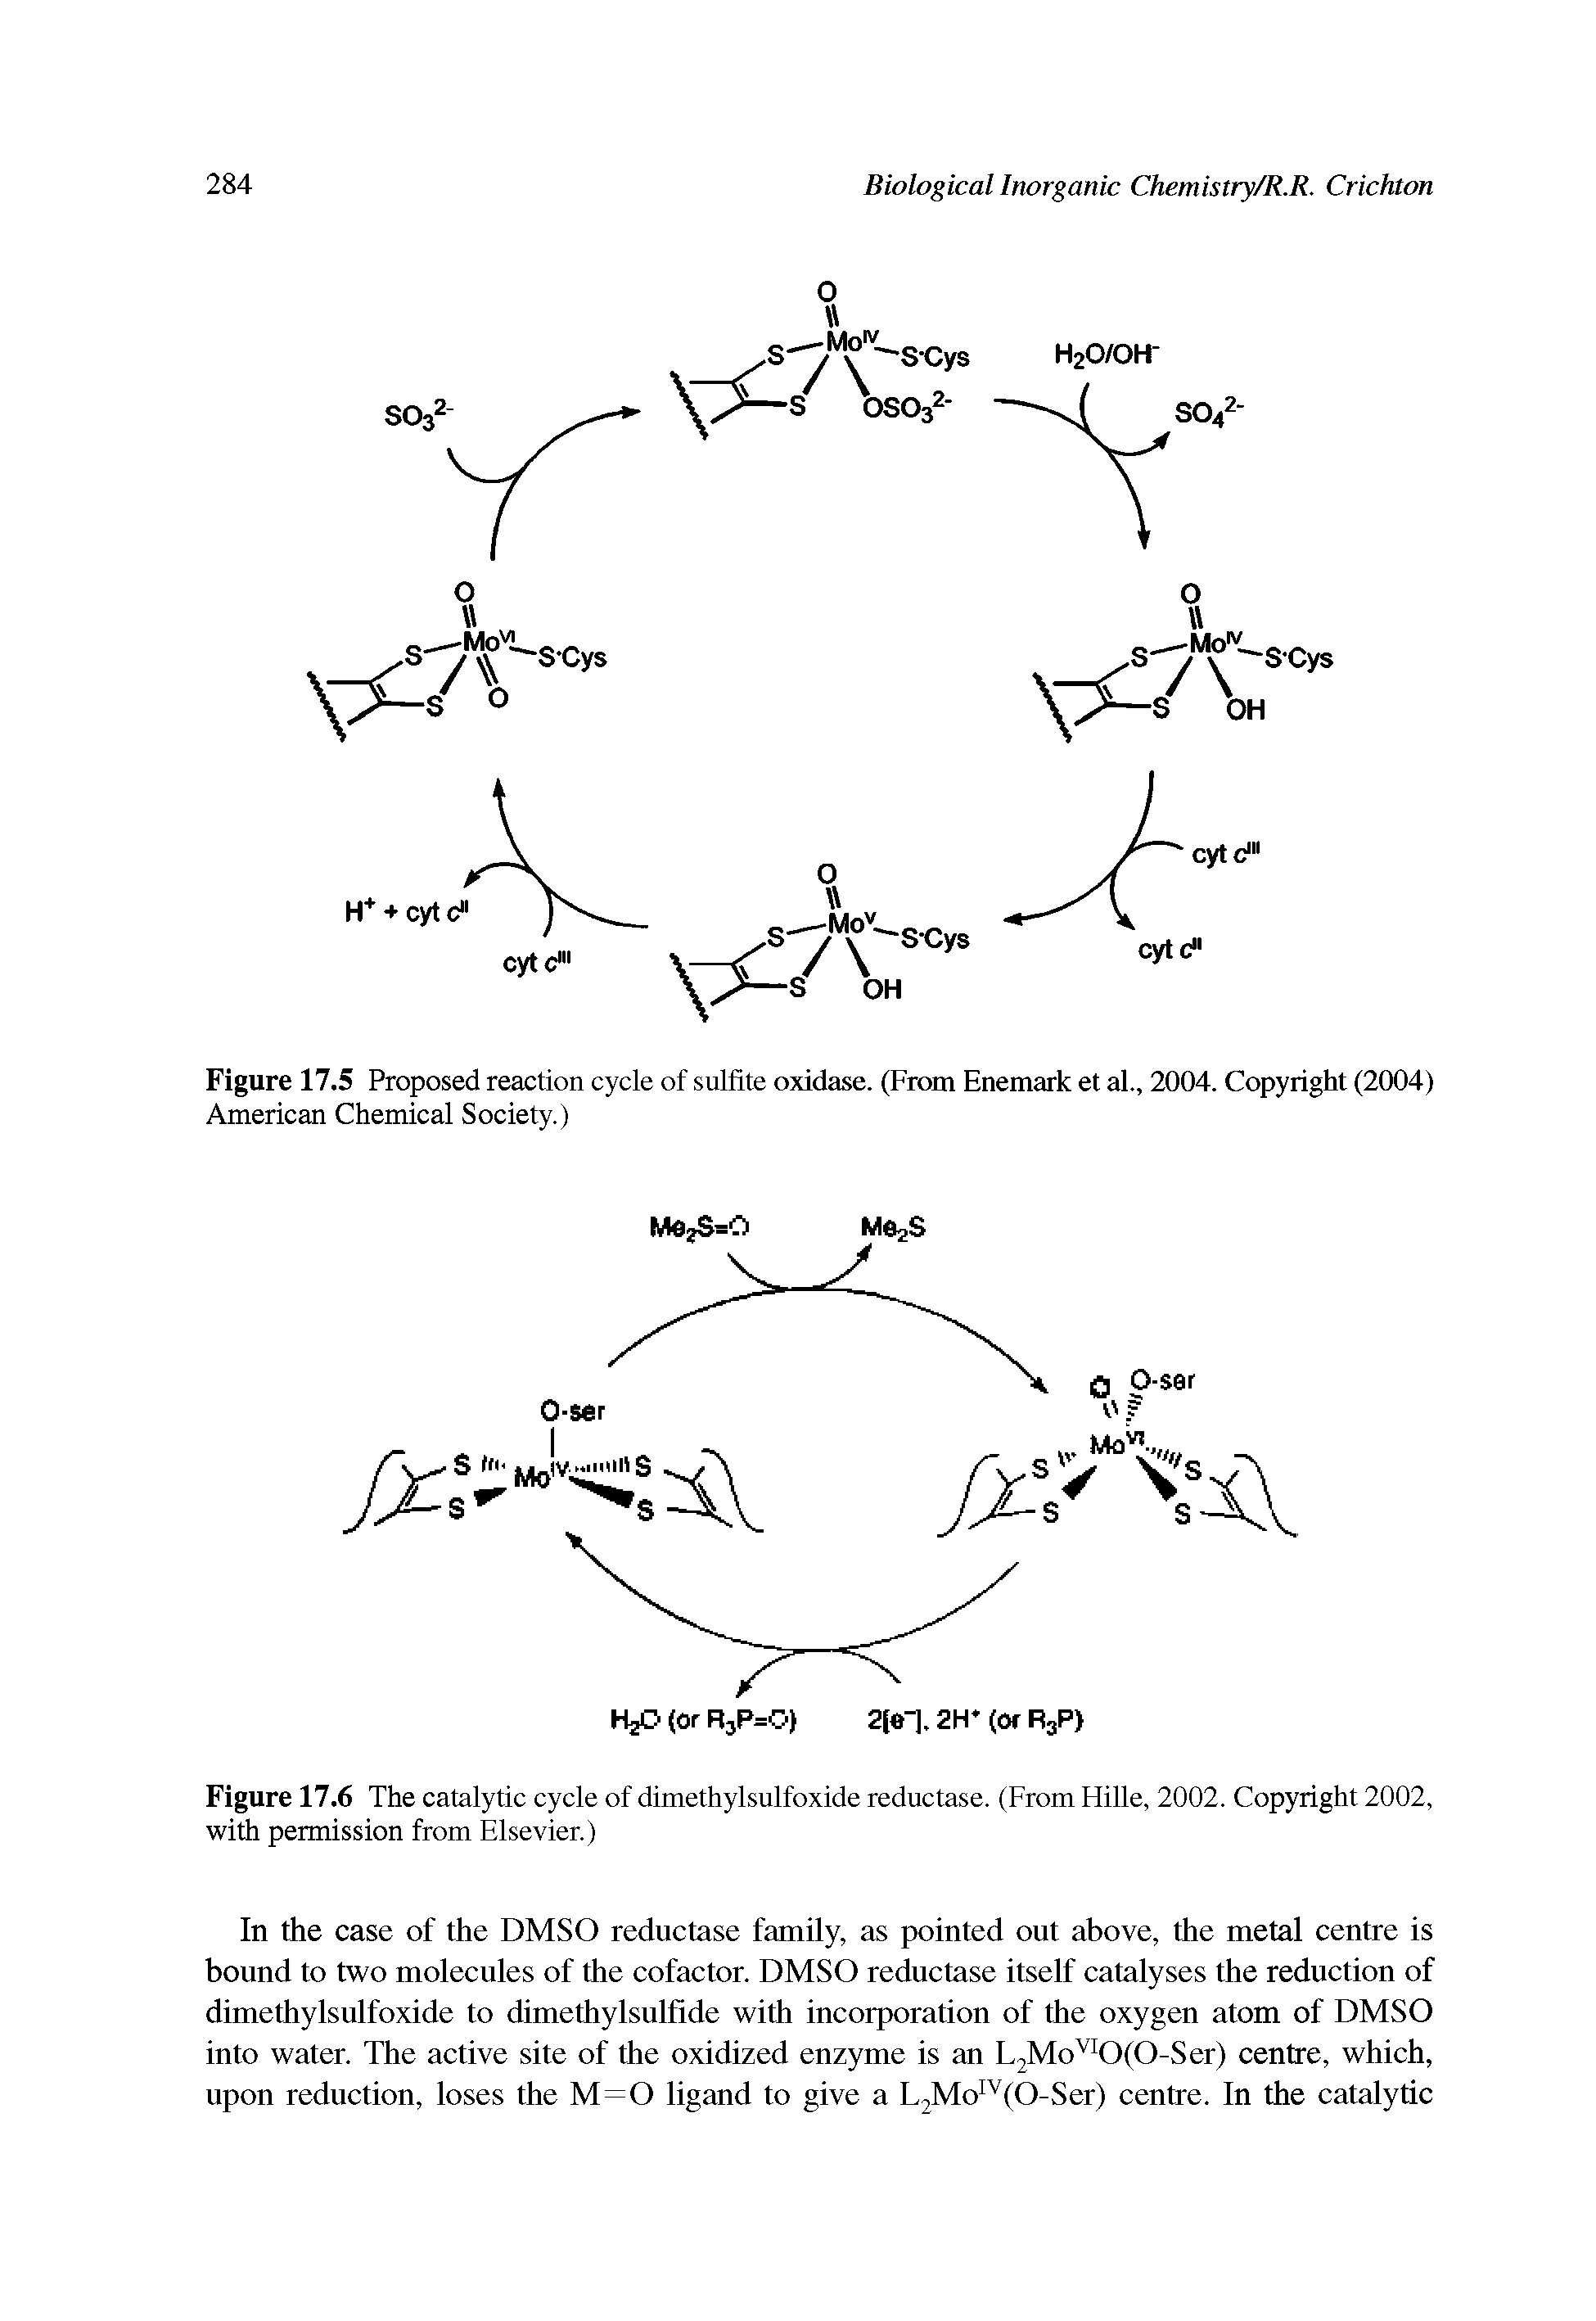 Figure 17.5 Proposed reaction cycle of sulfite oxidase. (From Enemark et al., 2004. Copyright (2004) American Chemical Society.)...